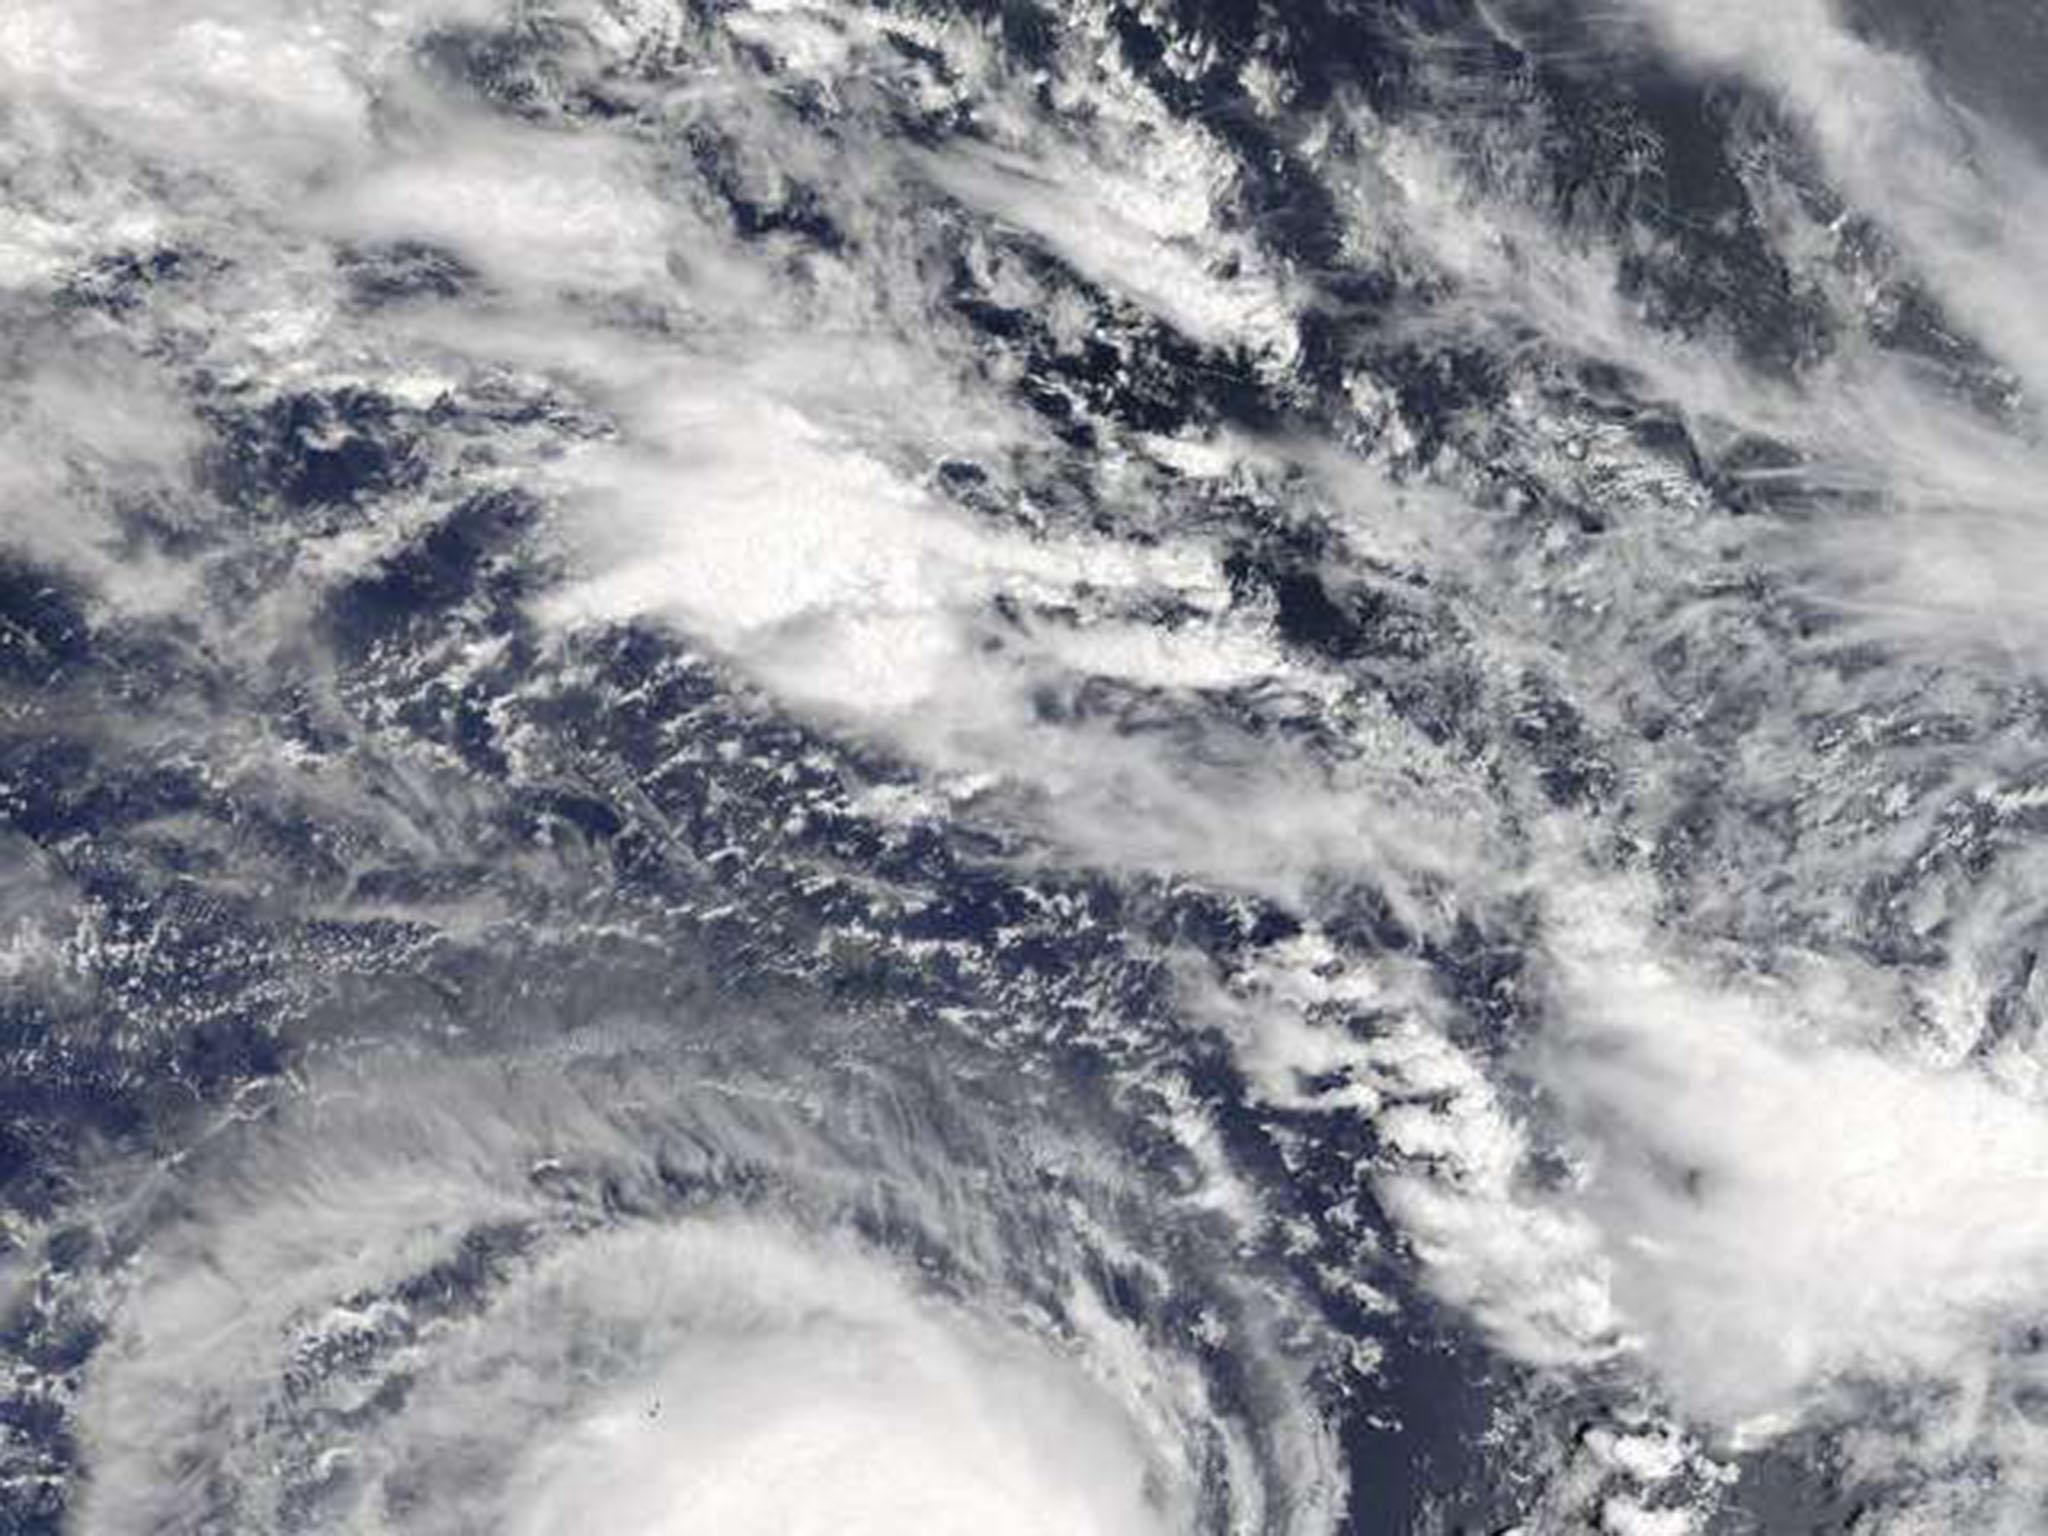 Mauritius prepares for Cyclone Berguitta forecast to bring high winds